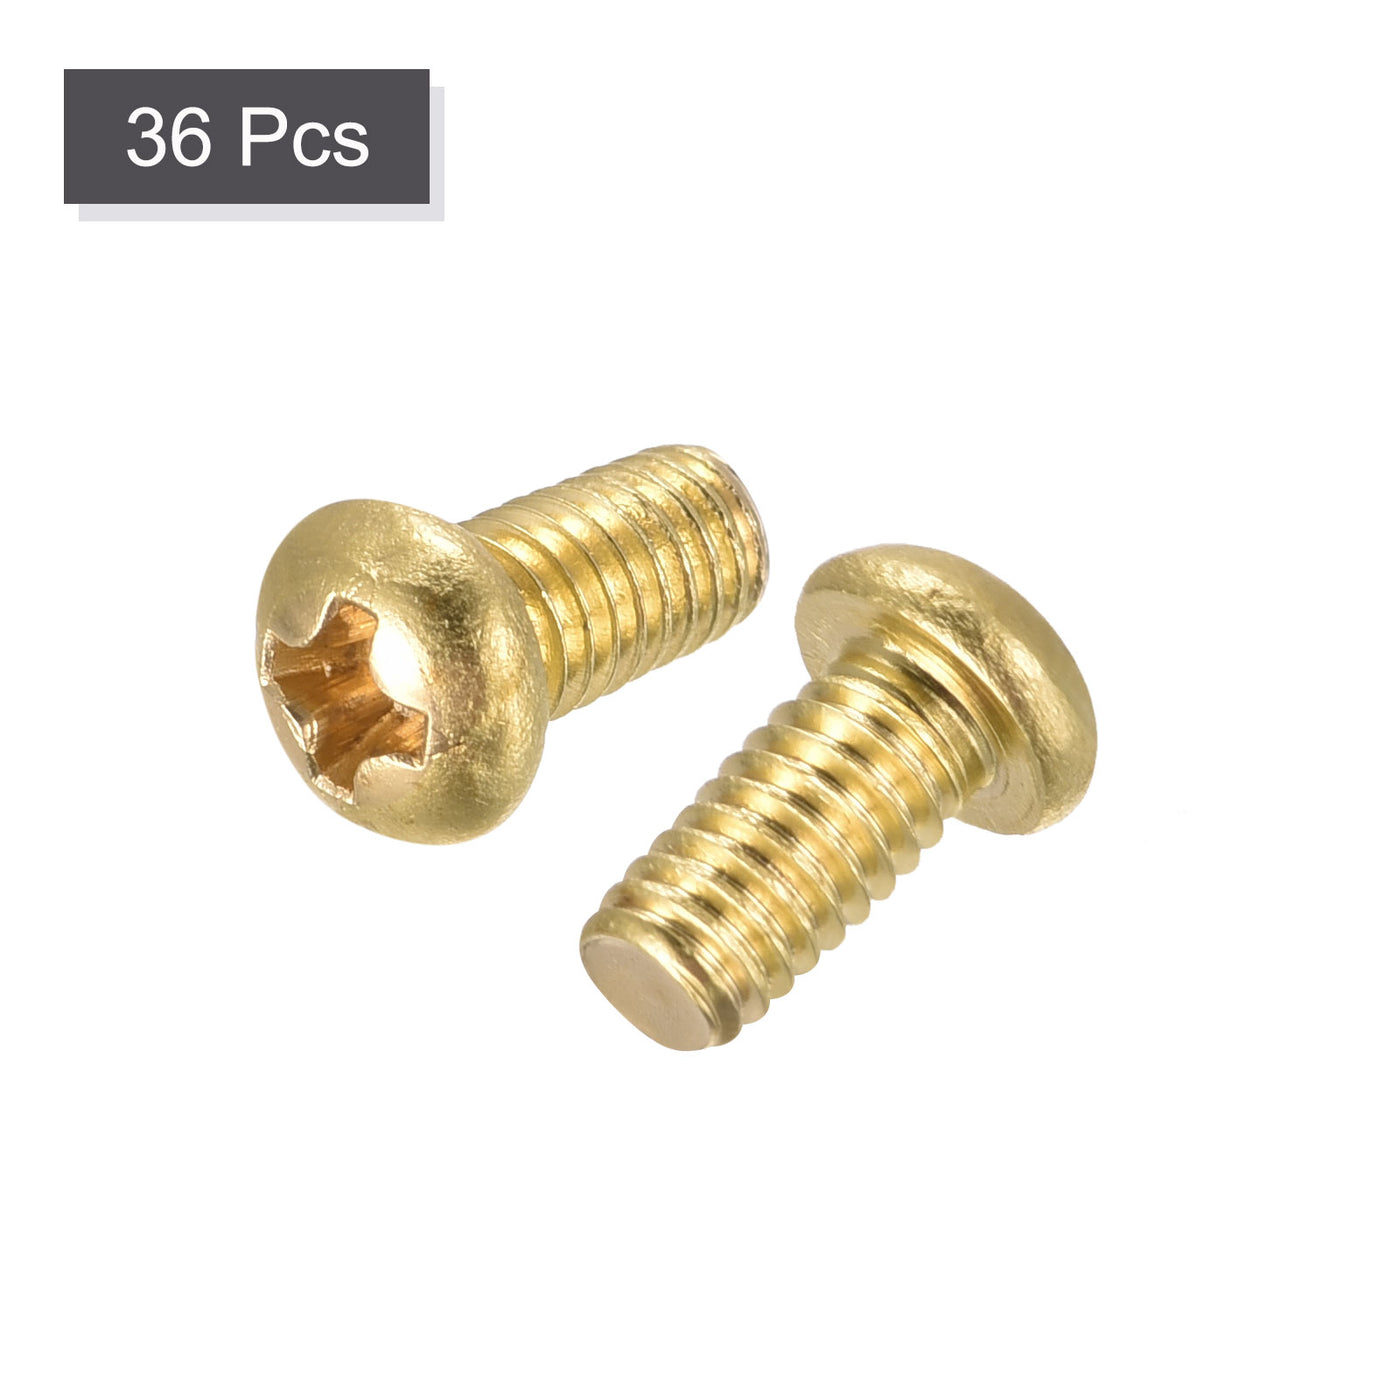 uxcell Uxcell Brass Machine Screws Phillips Pan Head Fastener Bolt for Furniture, Office Equipment, Electronics